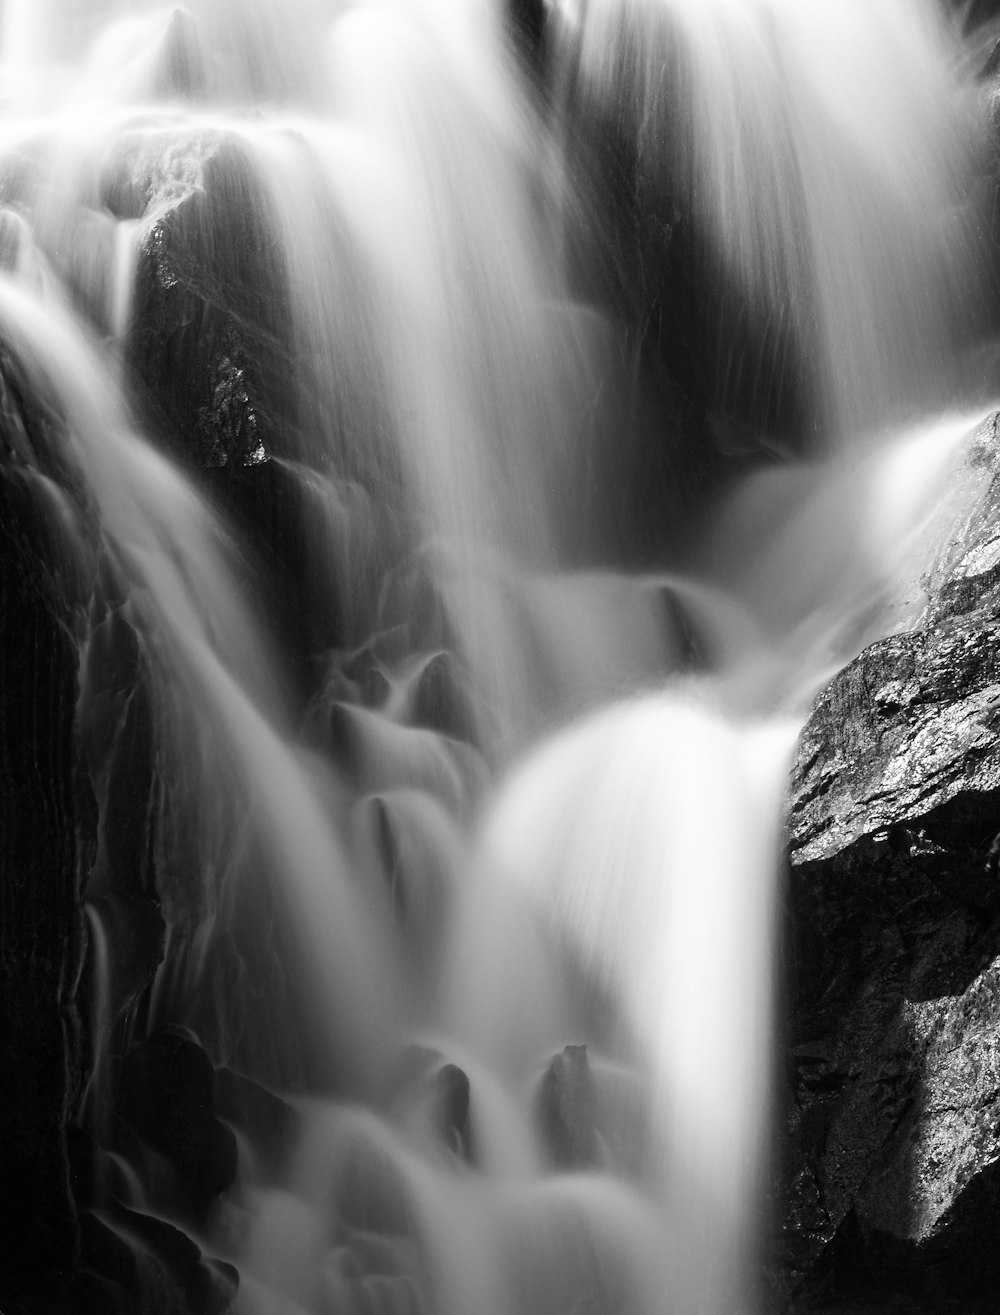 a black and white photo of a waterfall